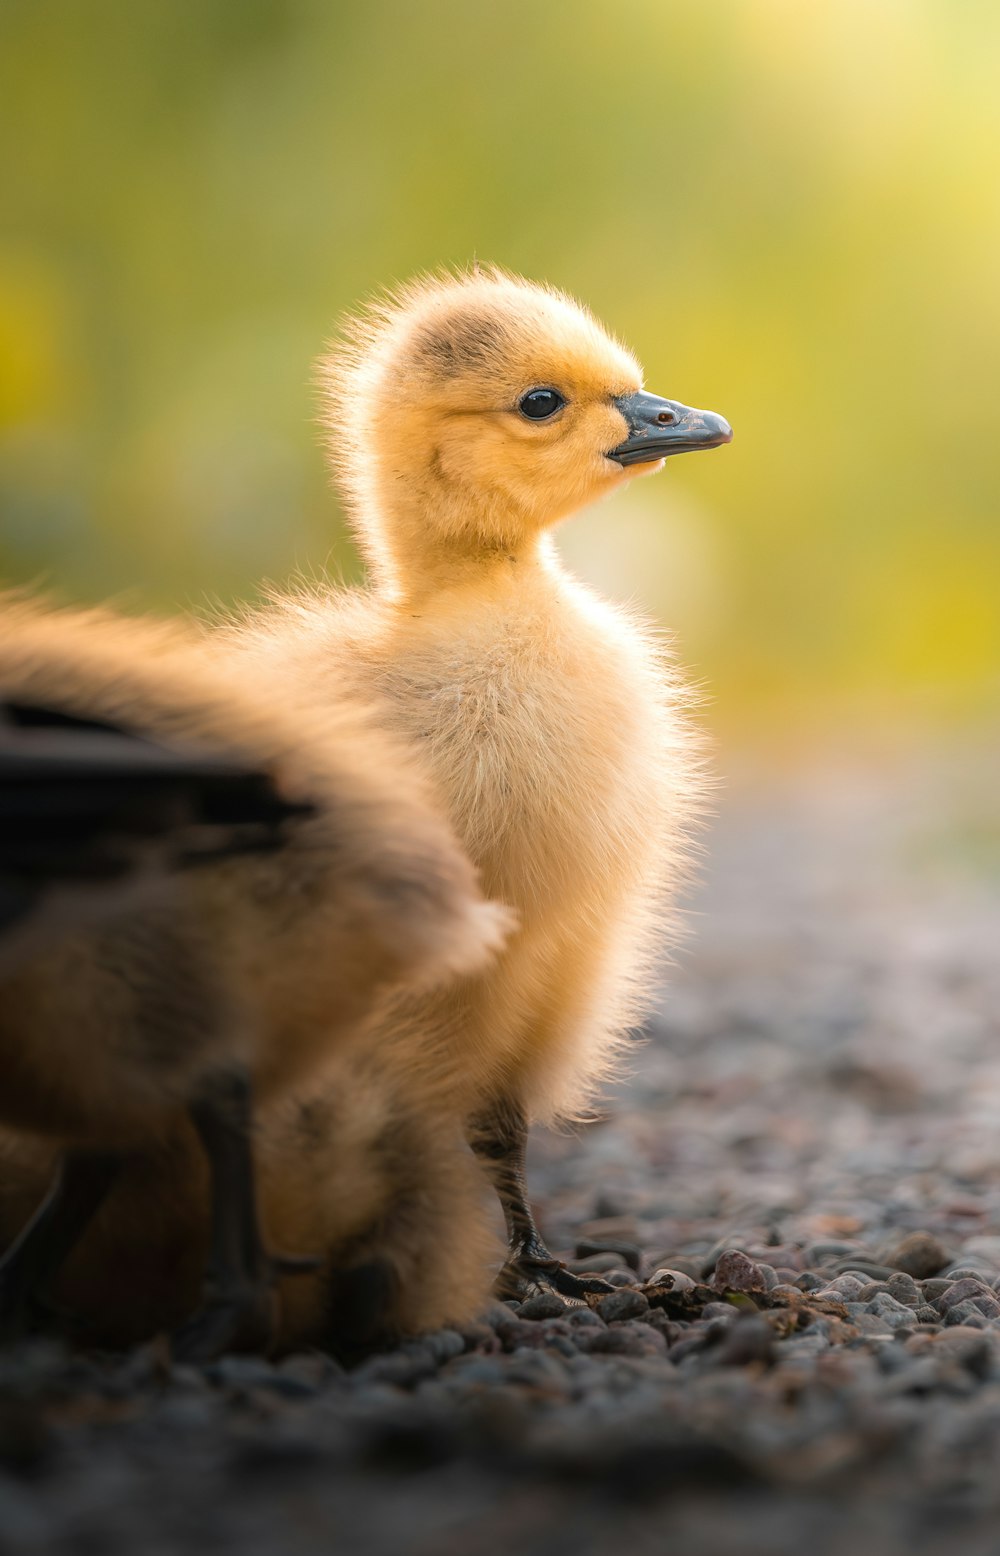 a baby duck is standing on the ground